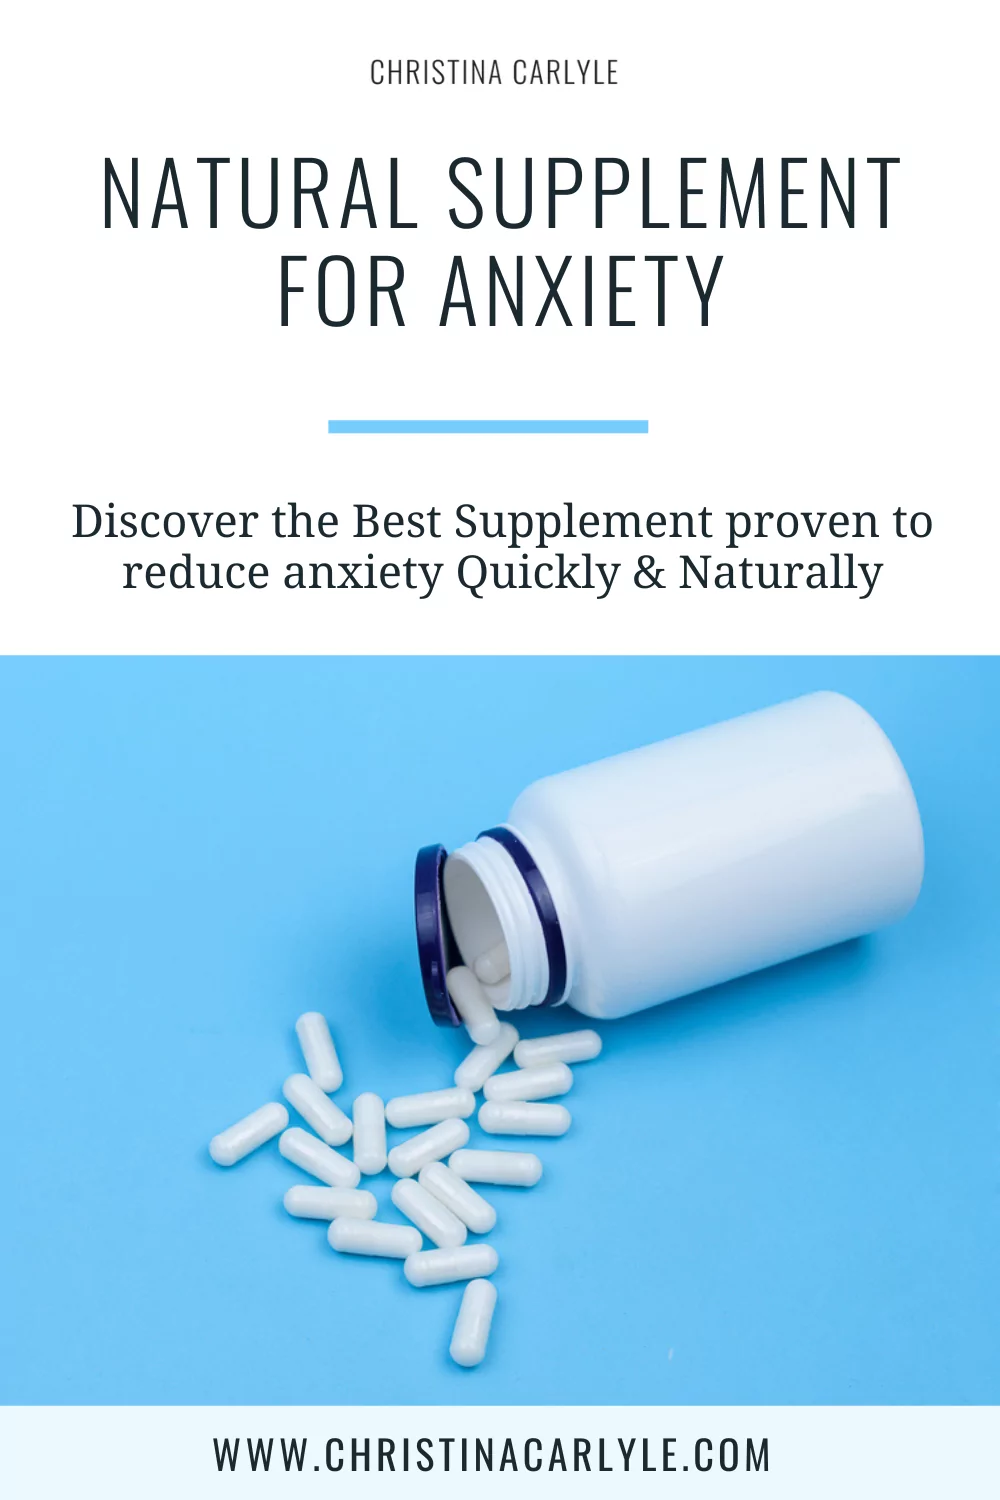 a picture of GABA supplements and a bottle and text that says NATURAL SUPPLEMENT FOR ANXIETY